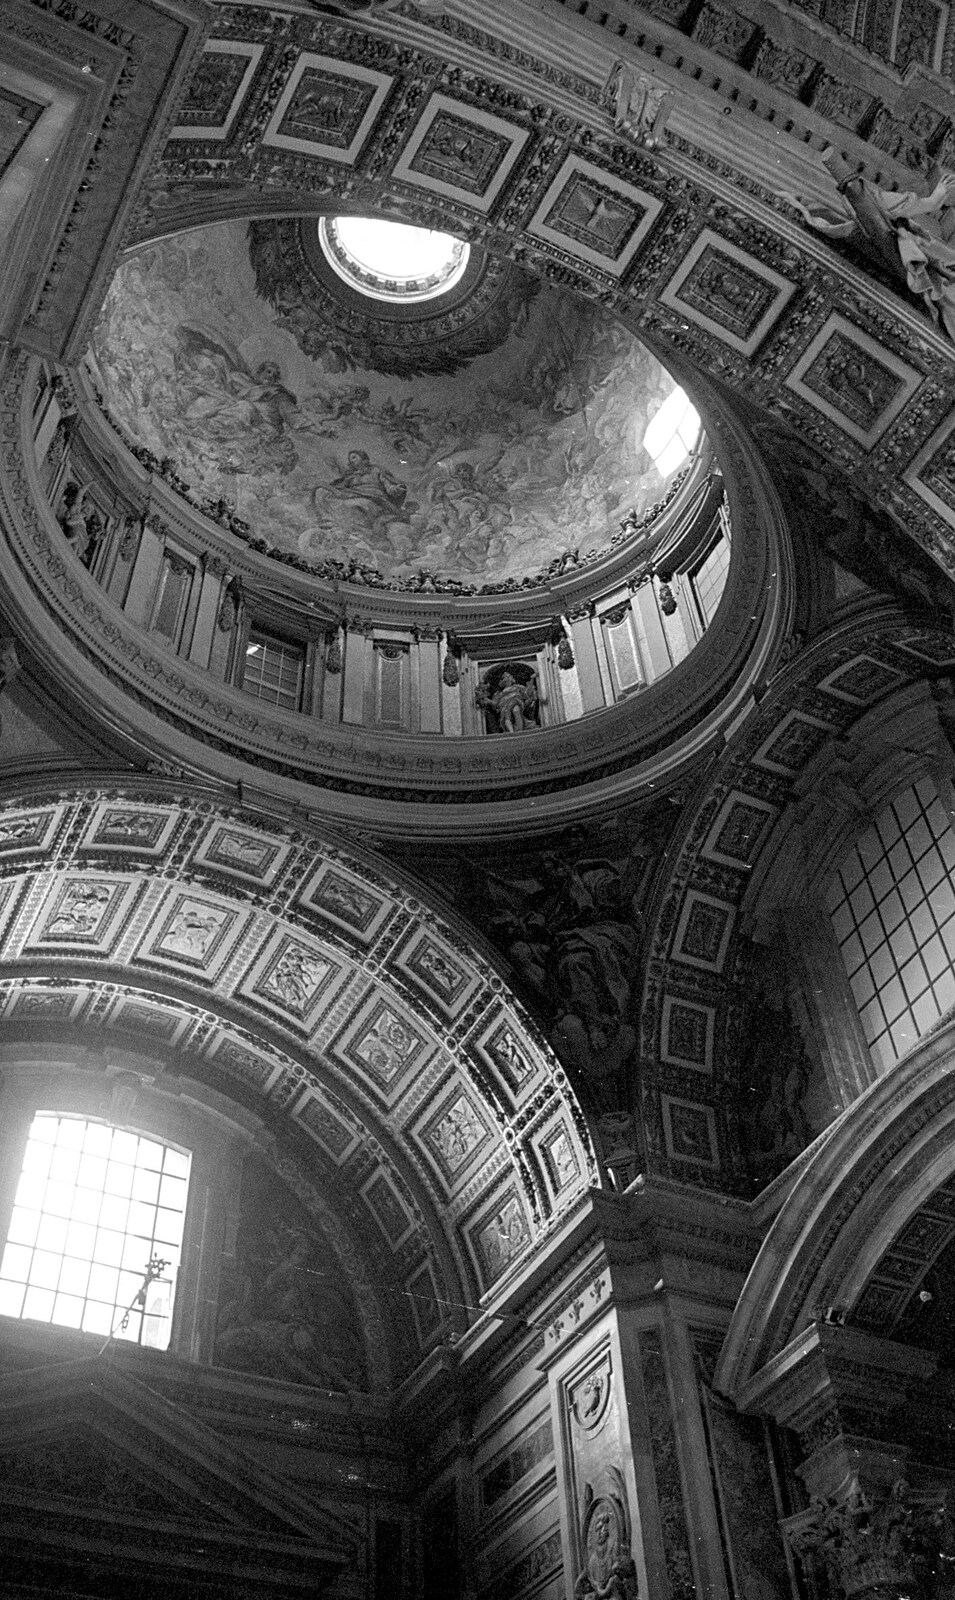 St. Peter's from A Working Trip to Rome, Italy - 10th September 1999